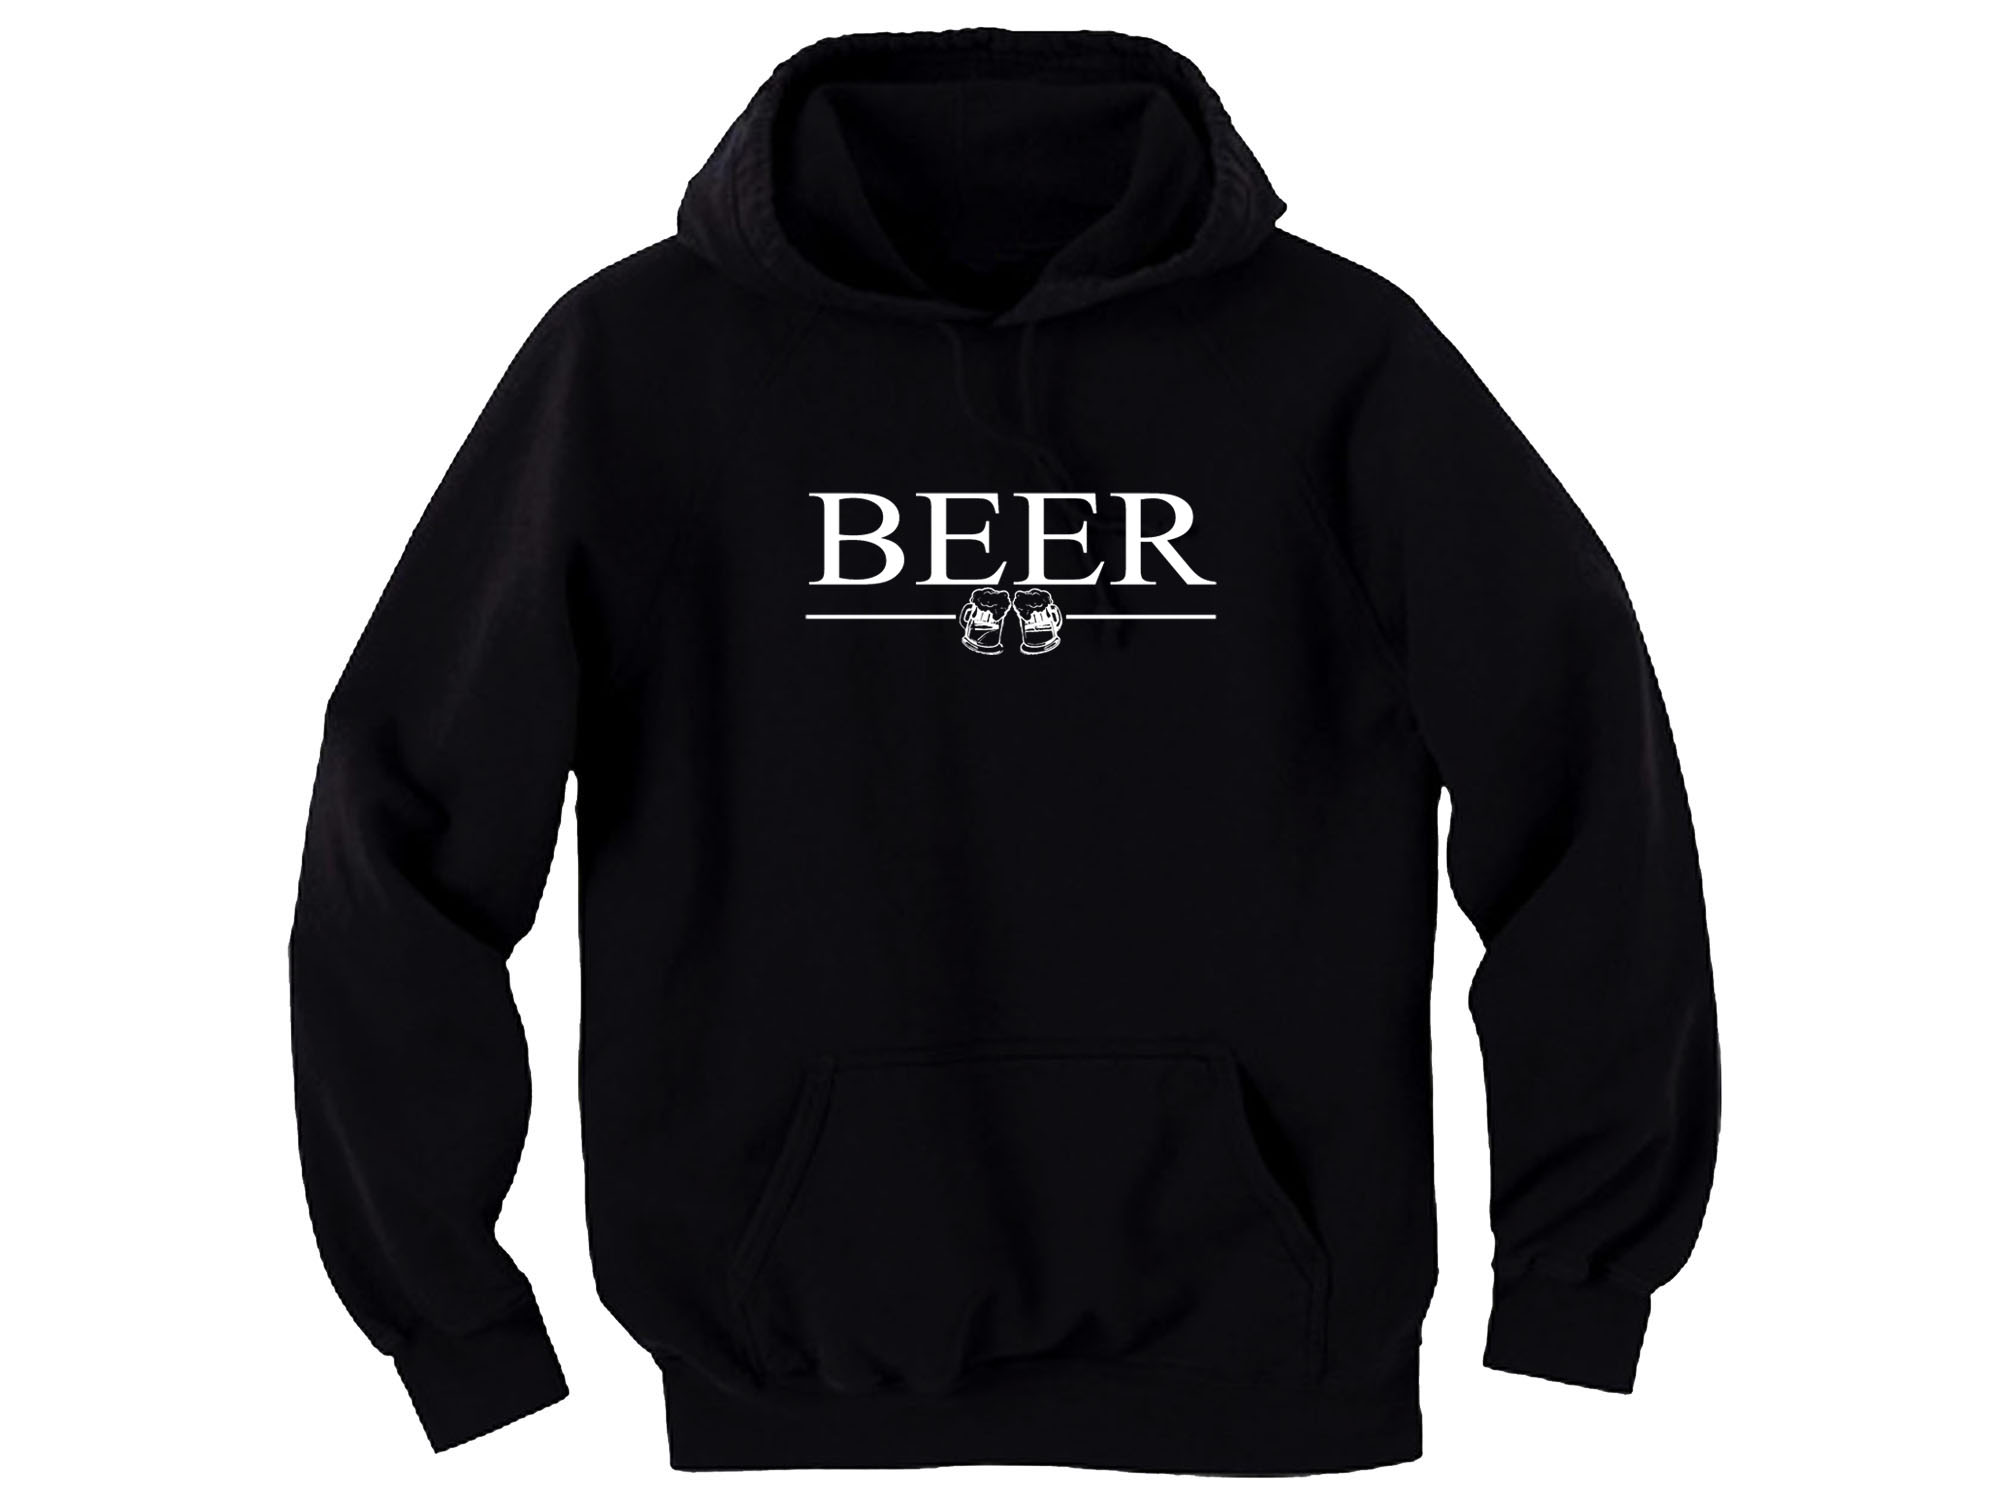 Beer funny drinking graphic sweat hoodie